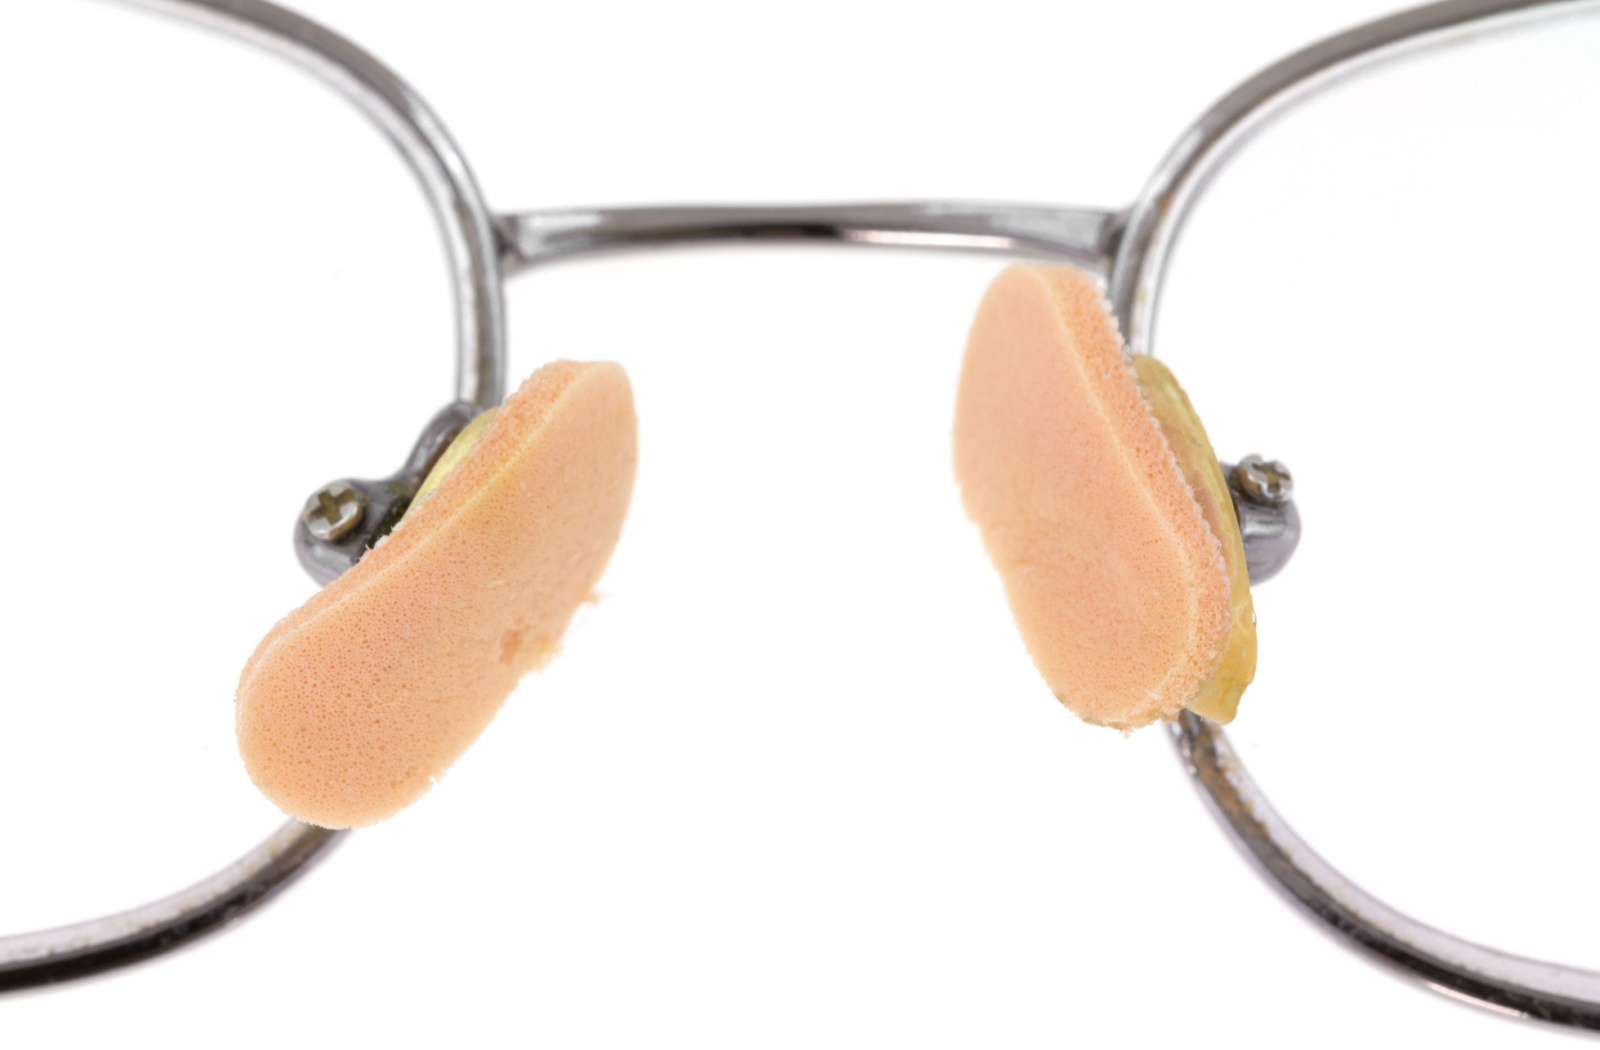 Adhesive pads have been affixed to the eyeglasses' nose pads, providing an extra layer of grip for enhanced comfort and stability.